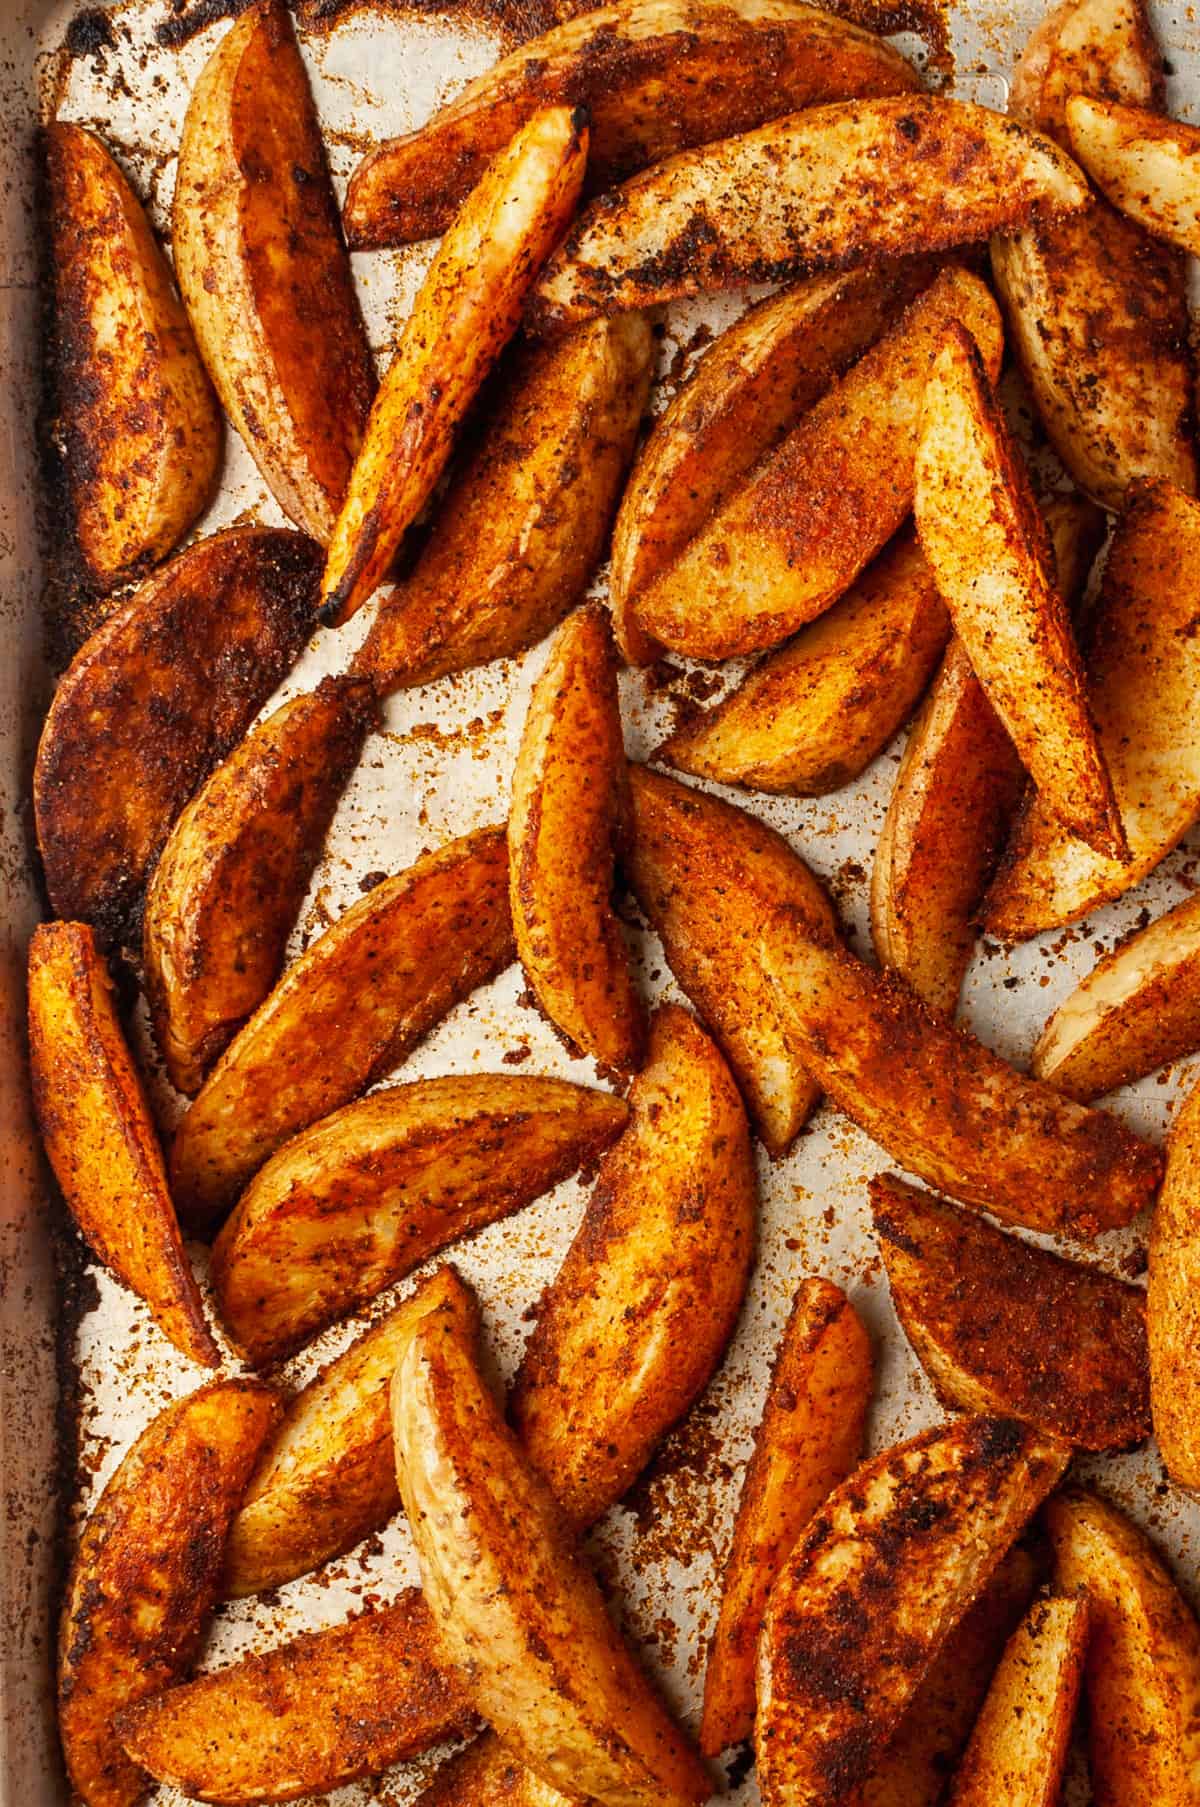 Overhead view of baked potato wedges on sheet pan